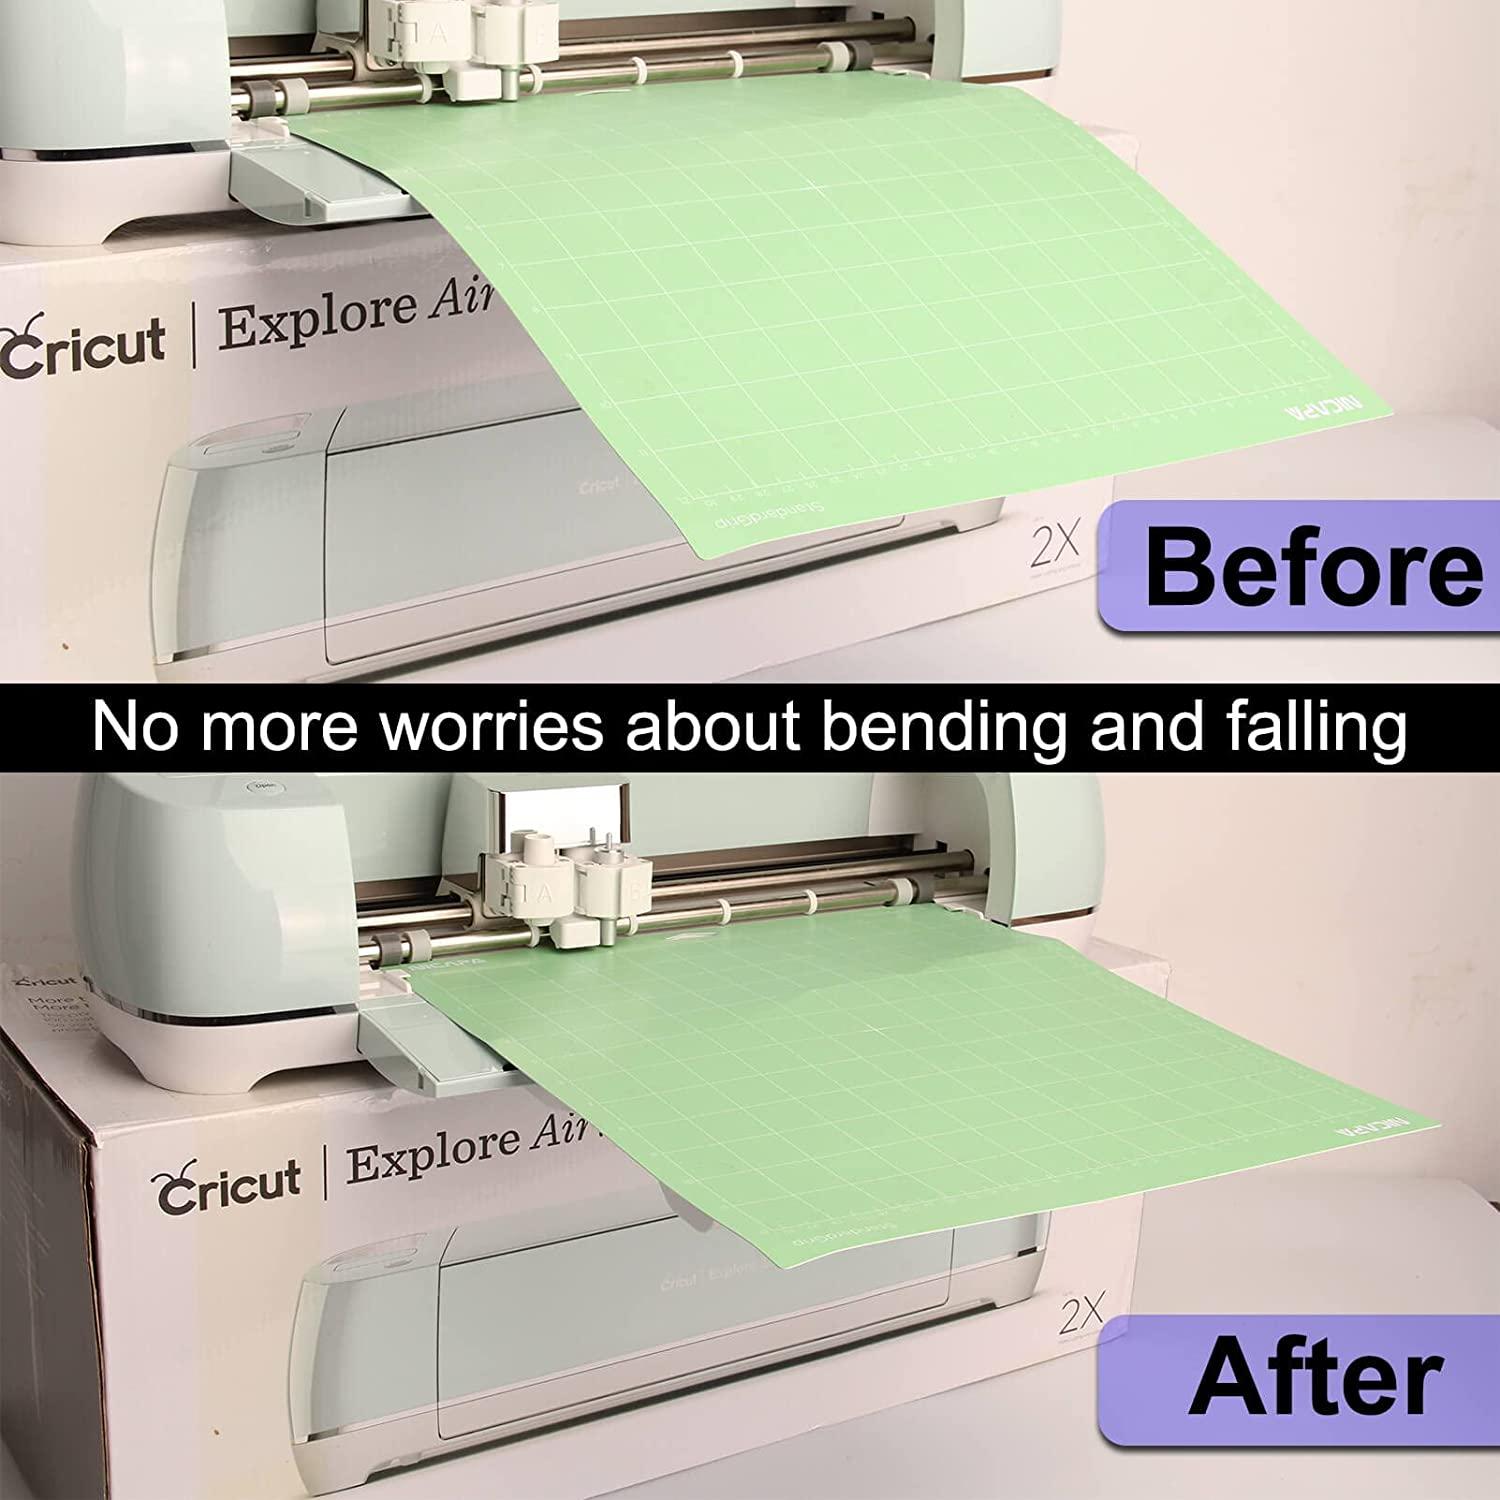 Extension Tray Compatible with Cricut Maker 3/Maker and Explore Air/2/3  Cricut Accessories and Supplies Tray Extender Holder - AliExpress